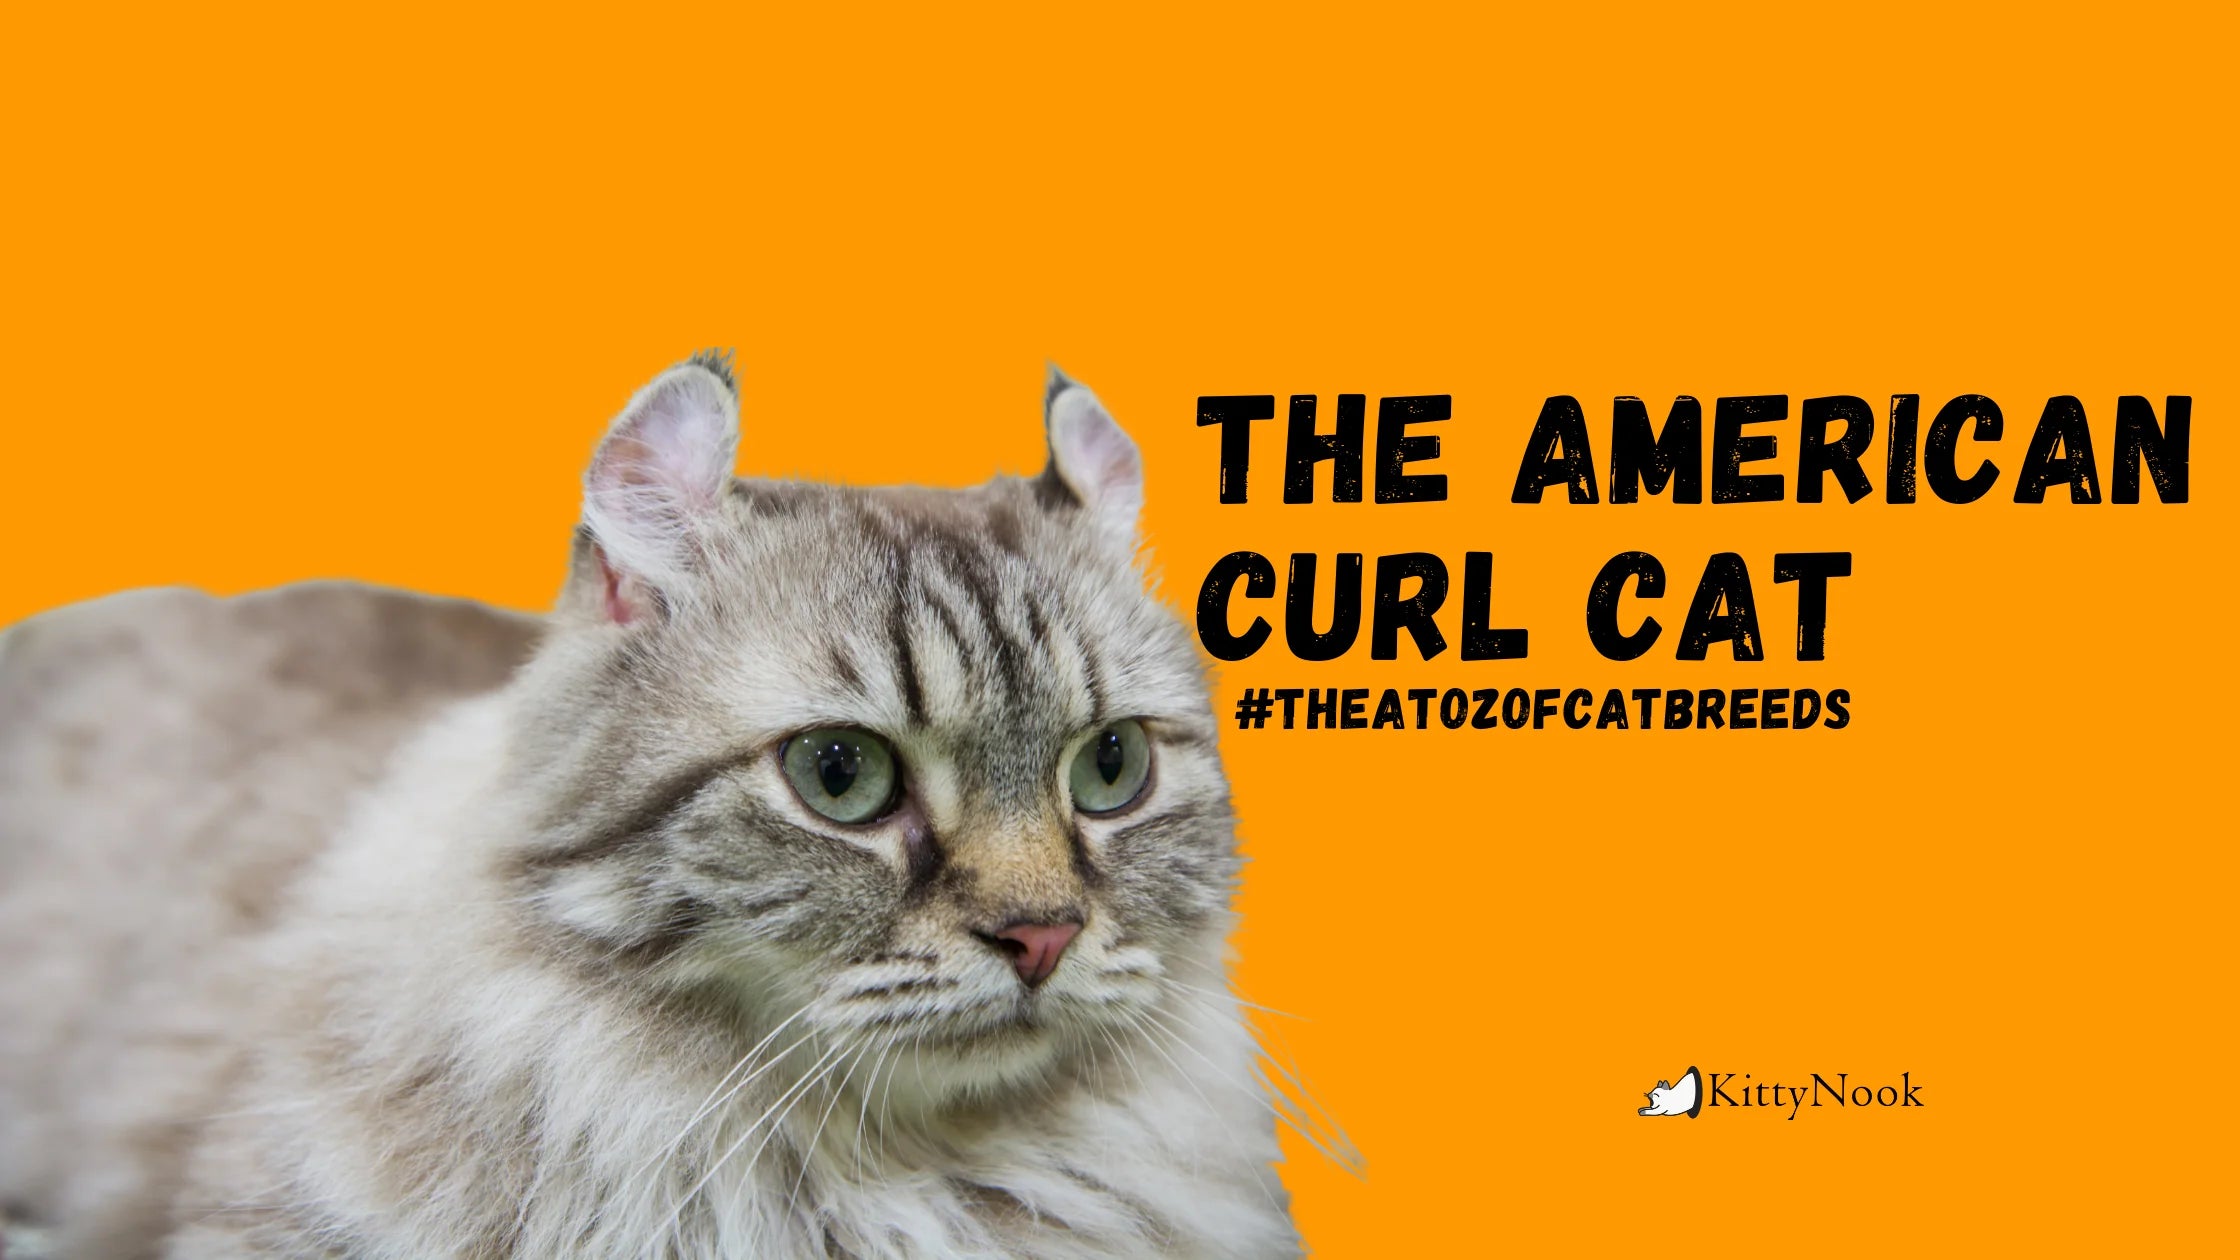 The American Curl Cat - KittyNook Cat Company